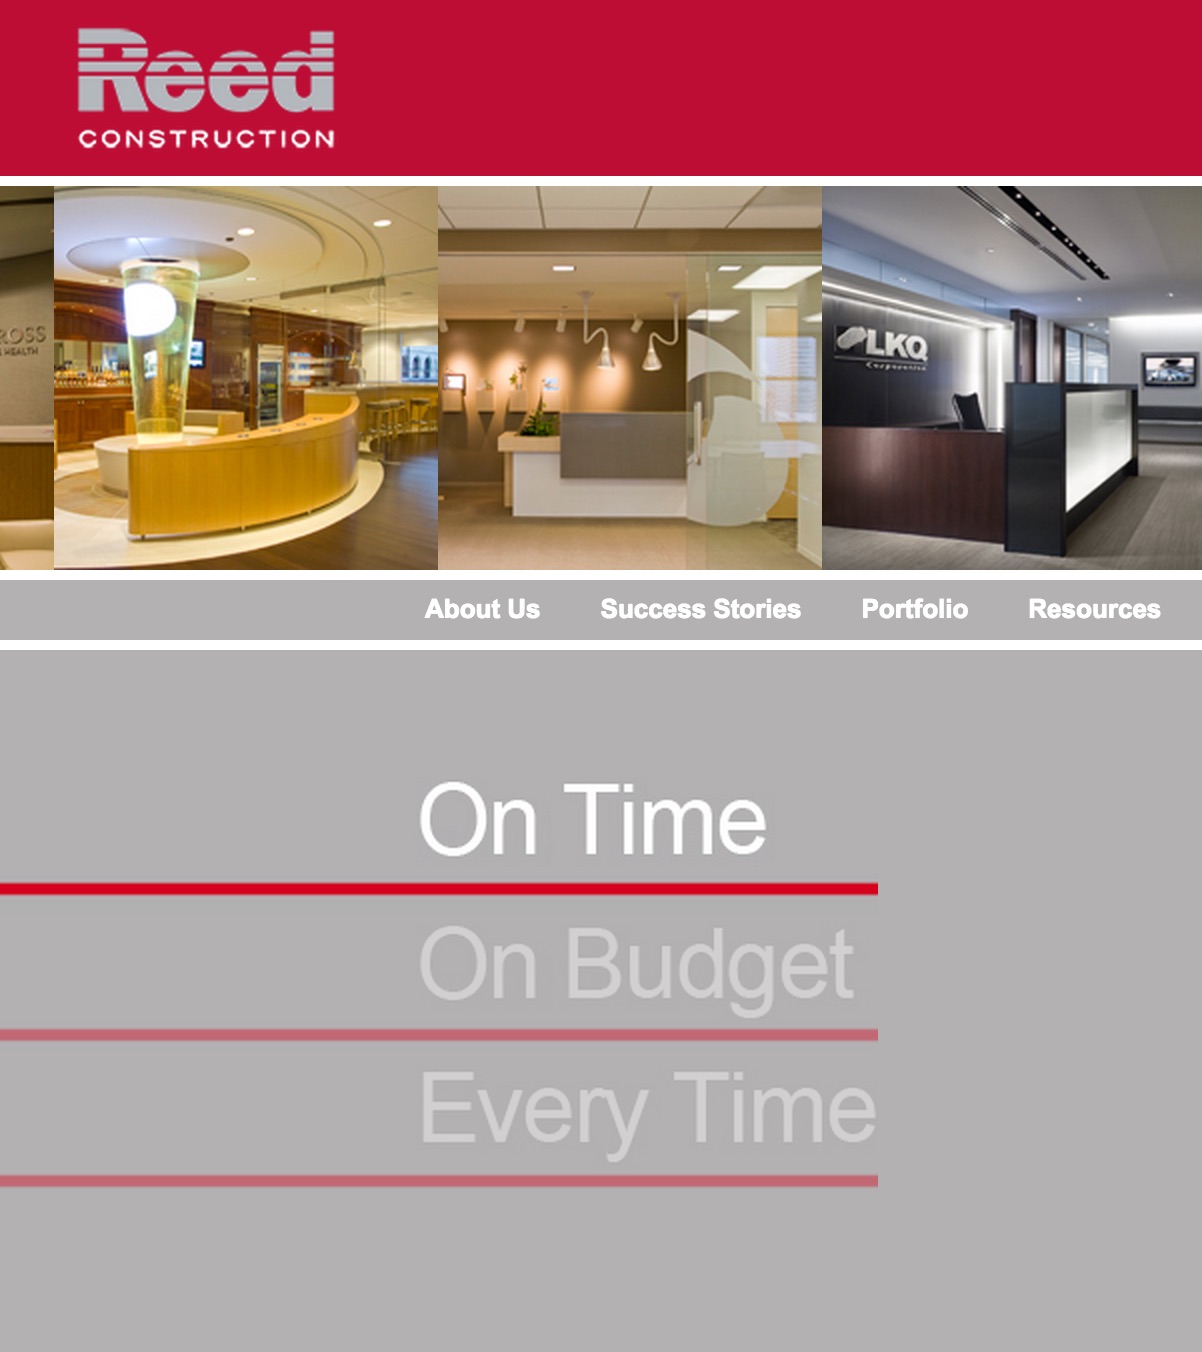 reed construction webpage